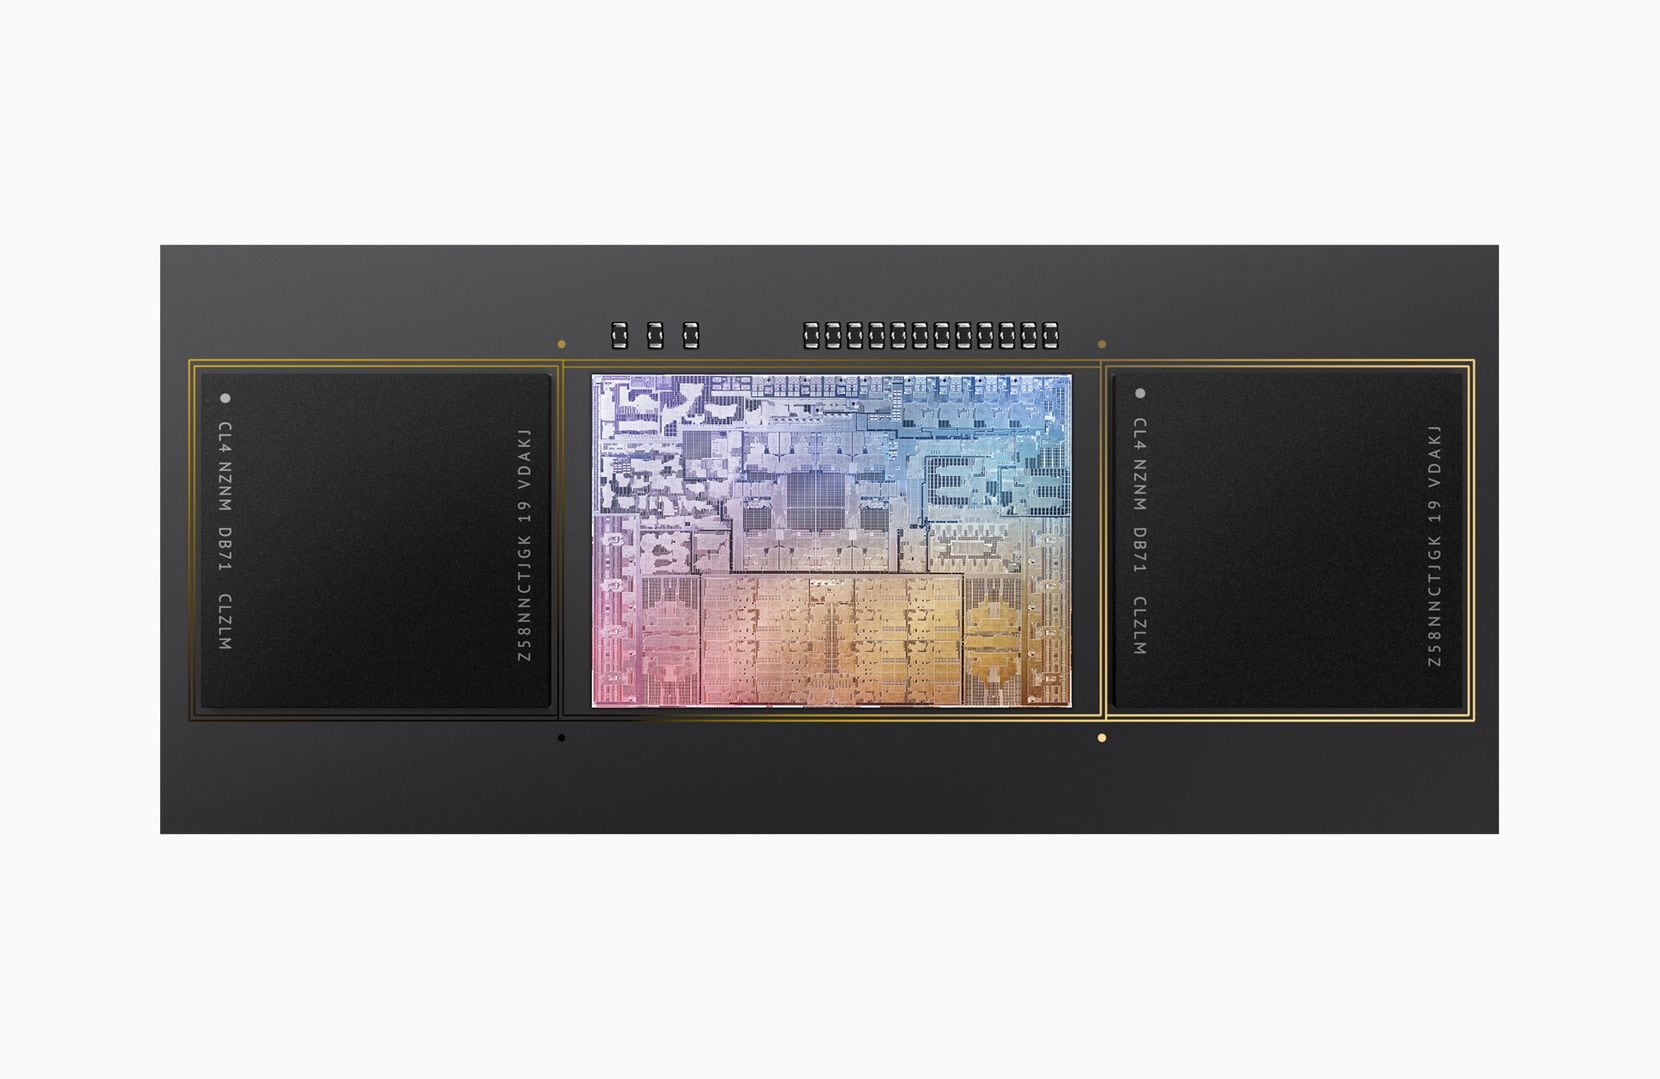 A look at the M1 Pro system on a chip.